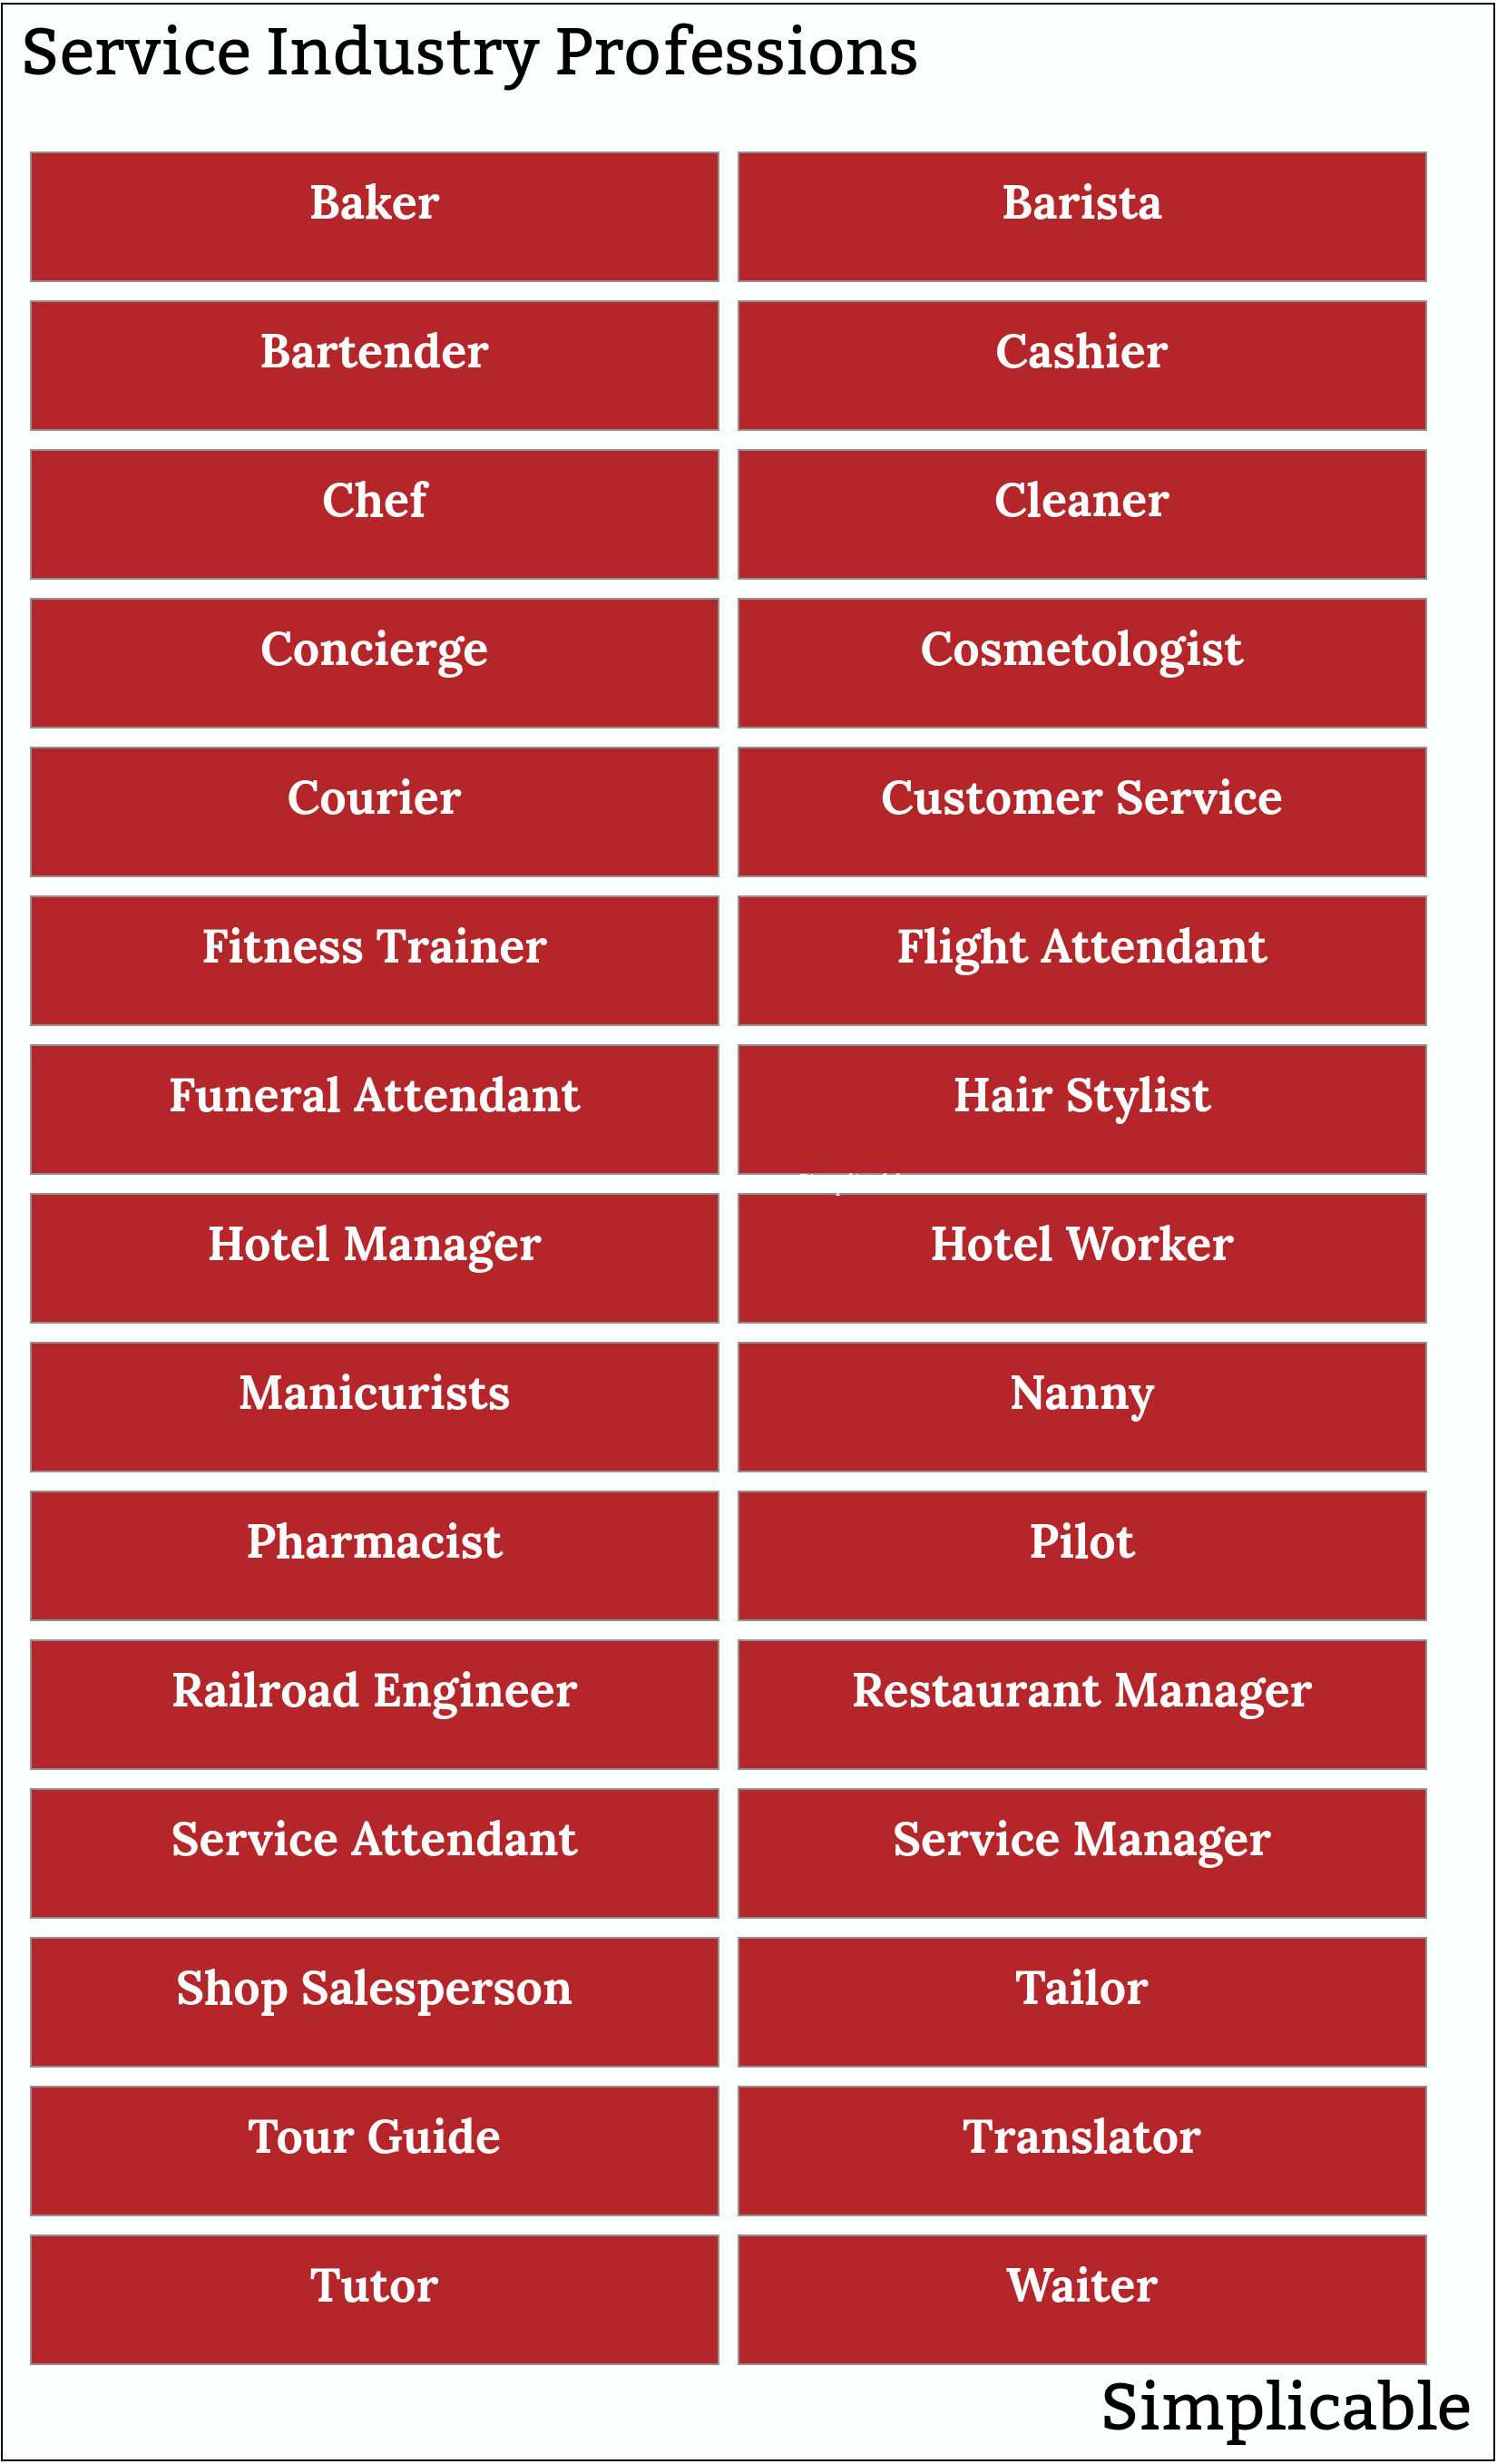 service industry professions